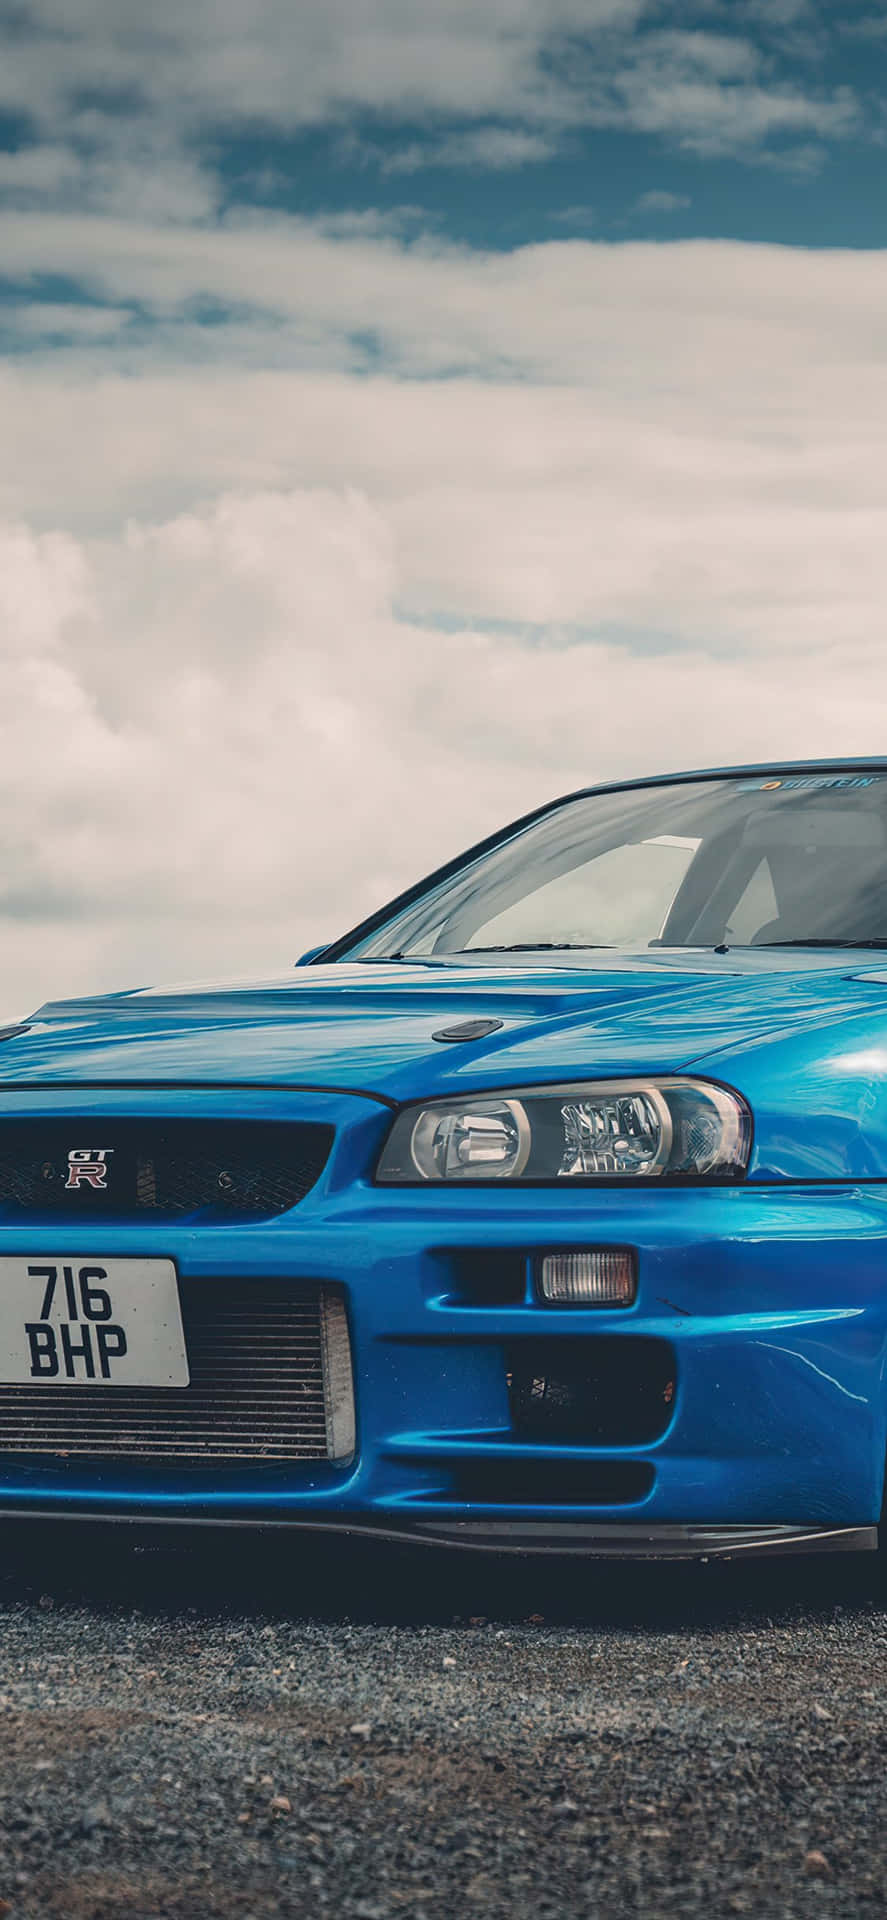 "Speed, power, and elegance all in one – The Nissan Skyline" Wallpaper